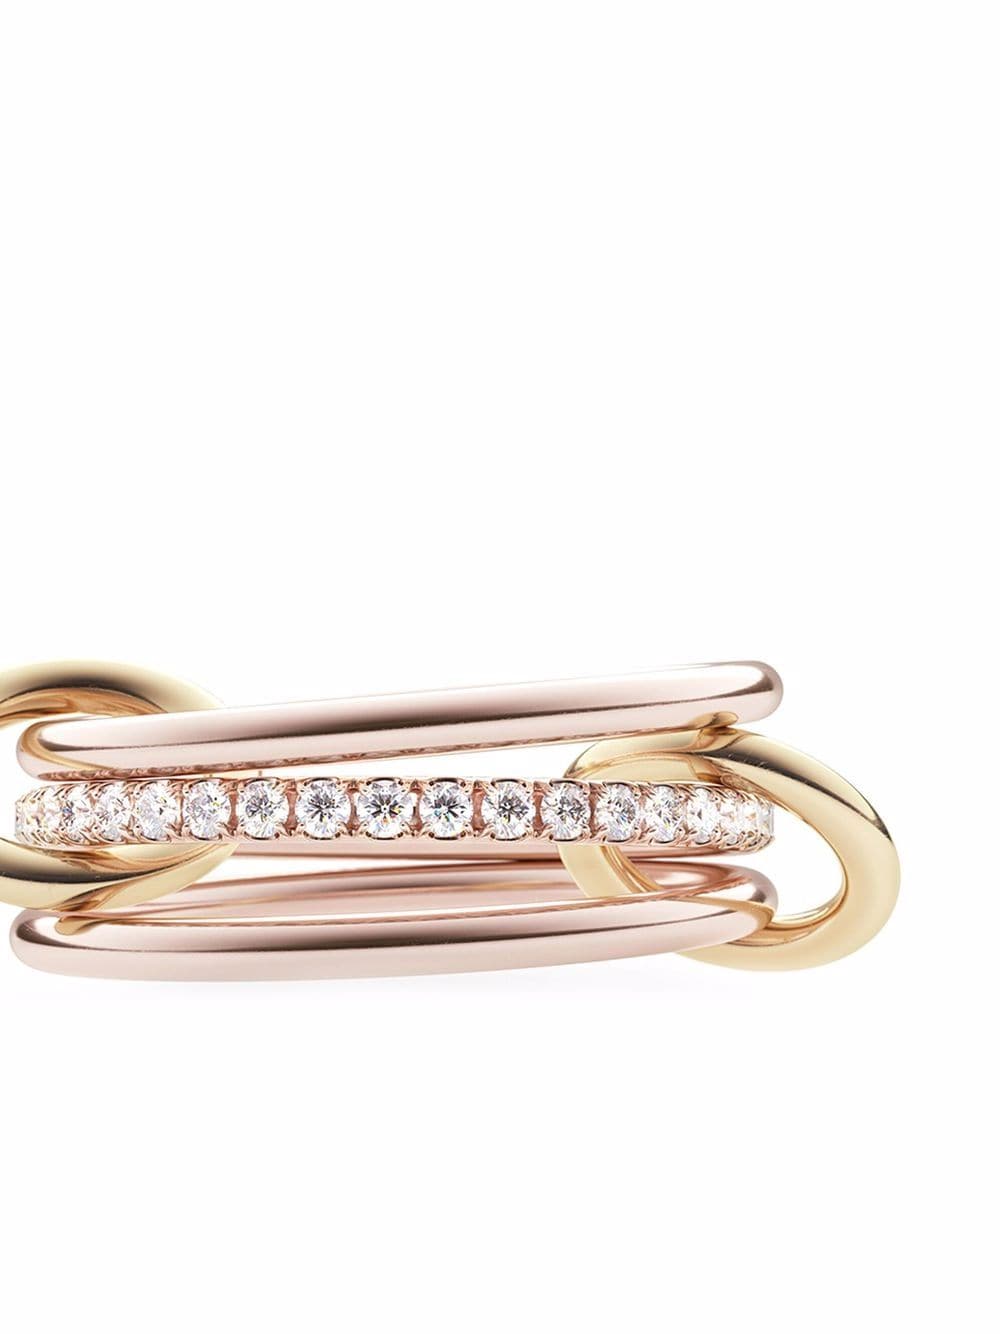 Image 2 of Spinelli Kilcollin 18kt yellow and rose gold Sonny 3-link diamond ring